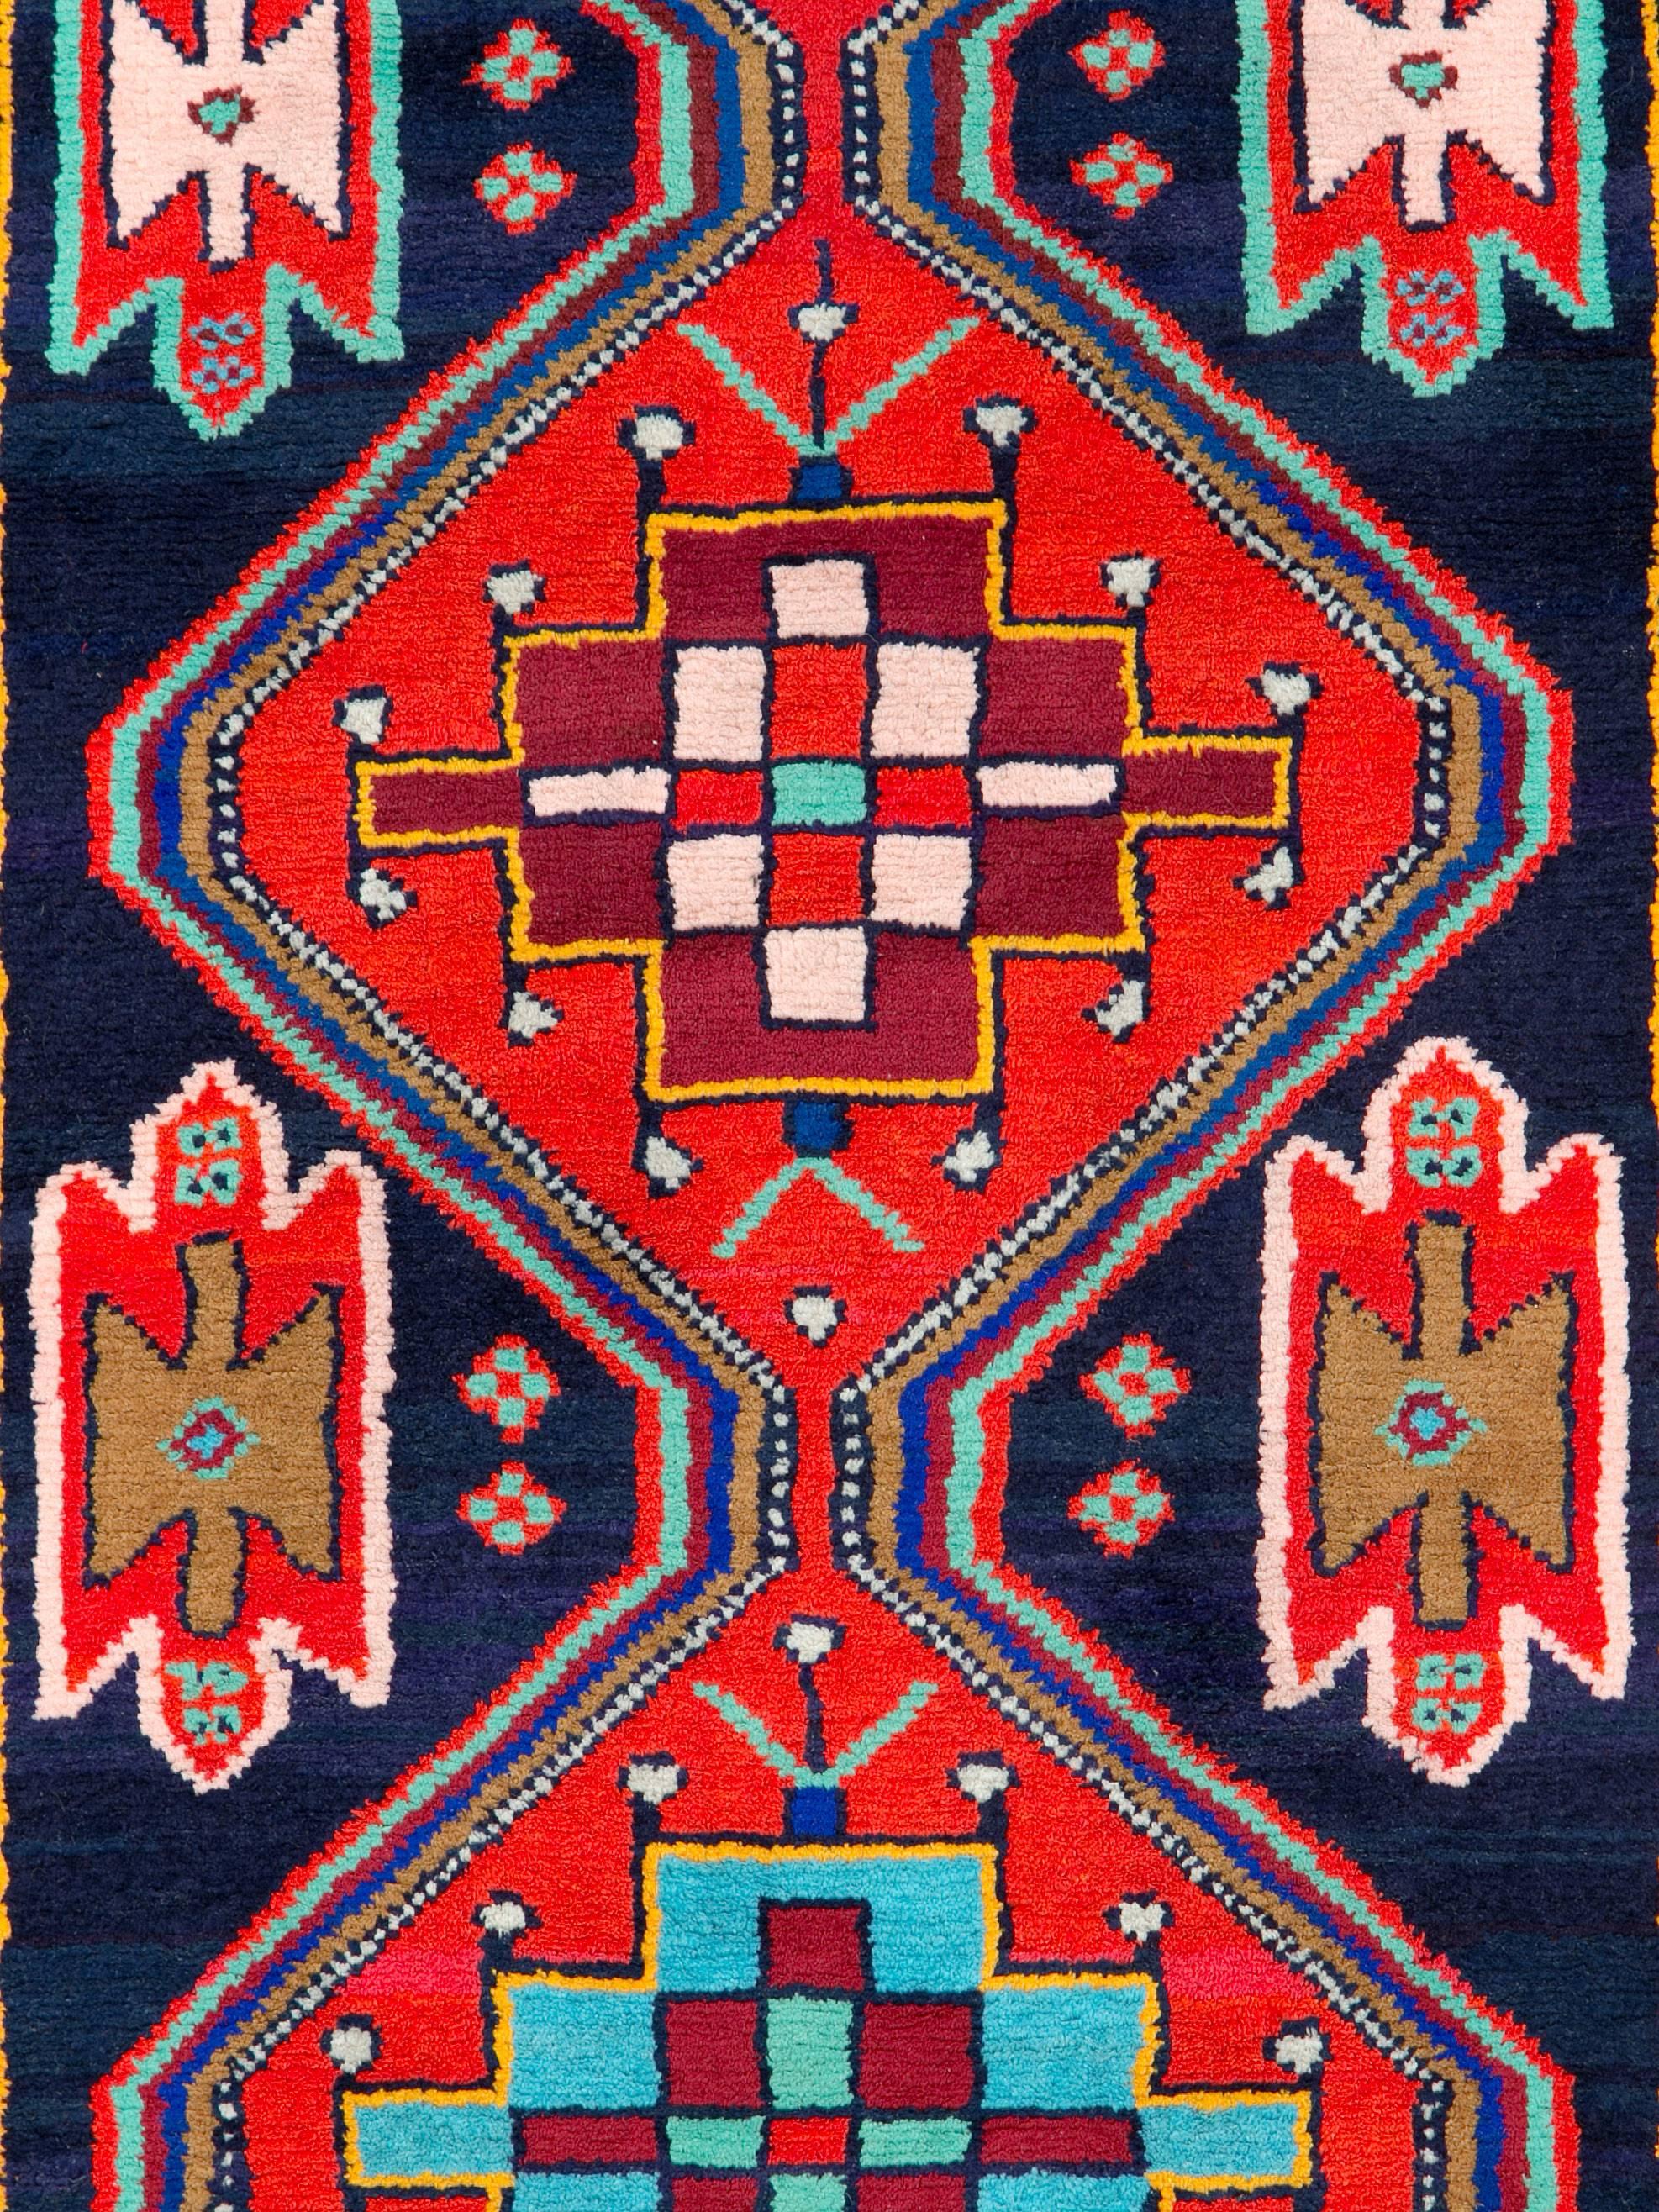 A vintage Persian Hamadan rug from the mid-20th century with cotton highlights.